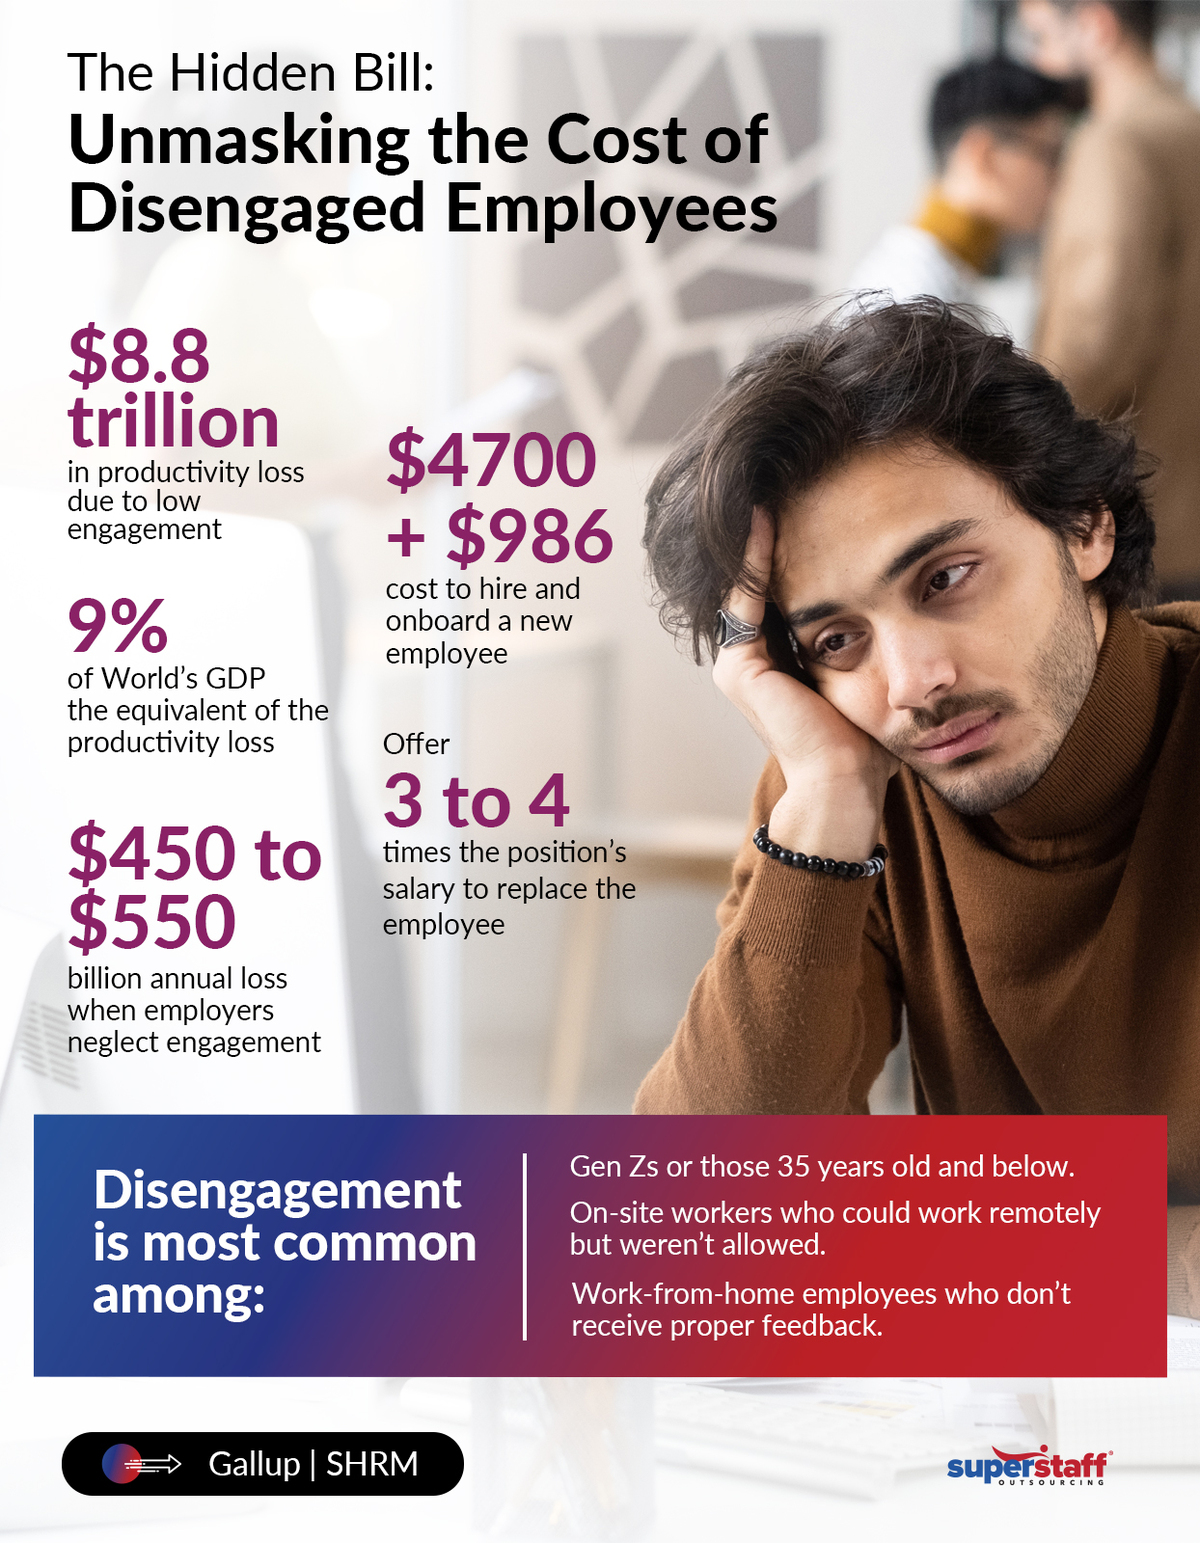 A sad employee looks on. Image caption reads: What is the cost of employee disengagement?